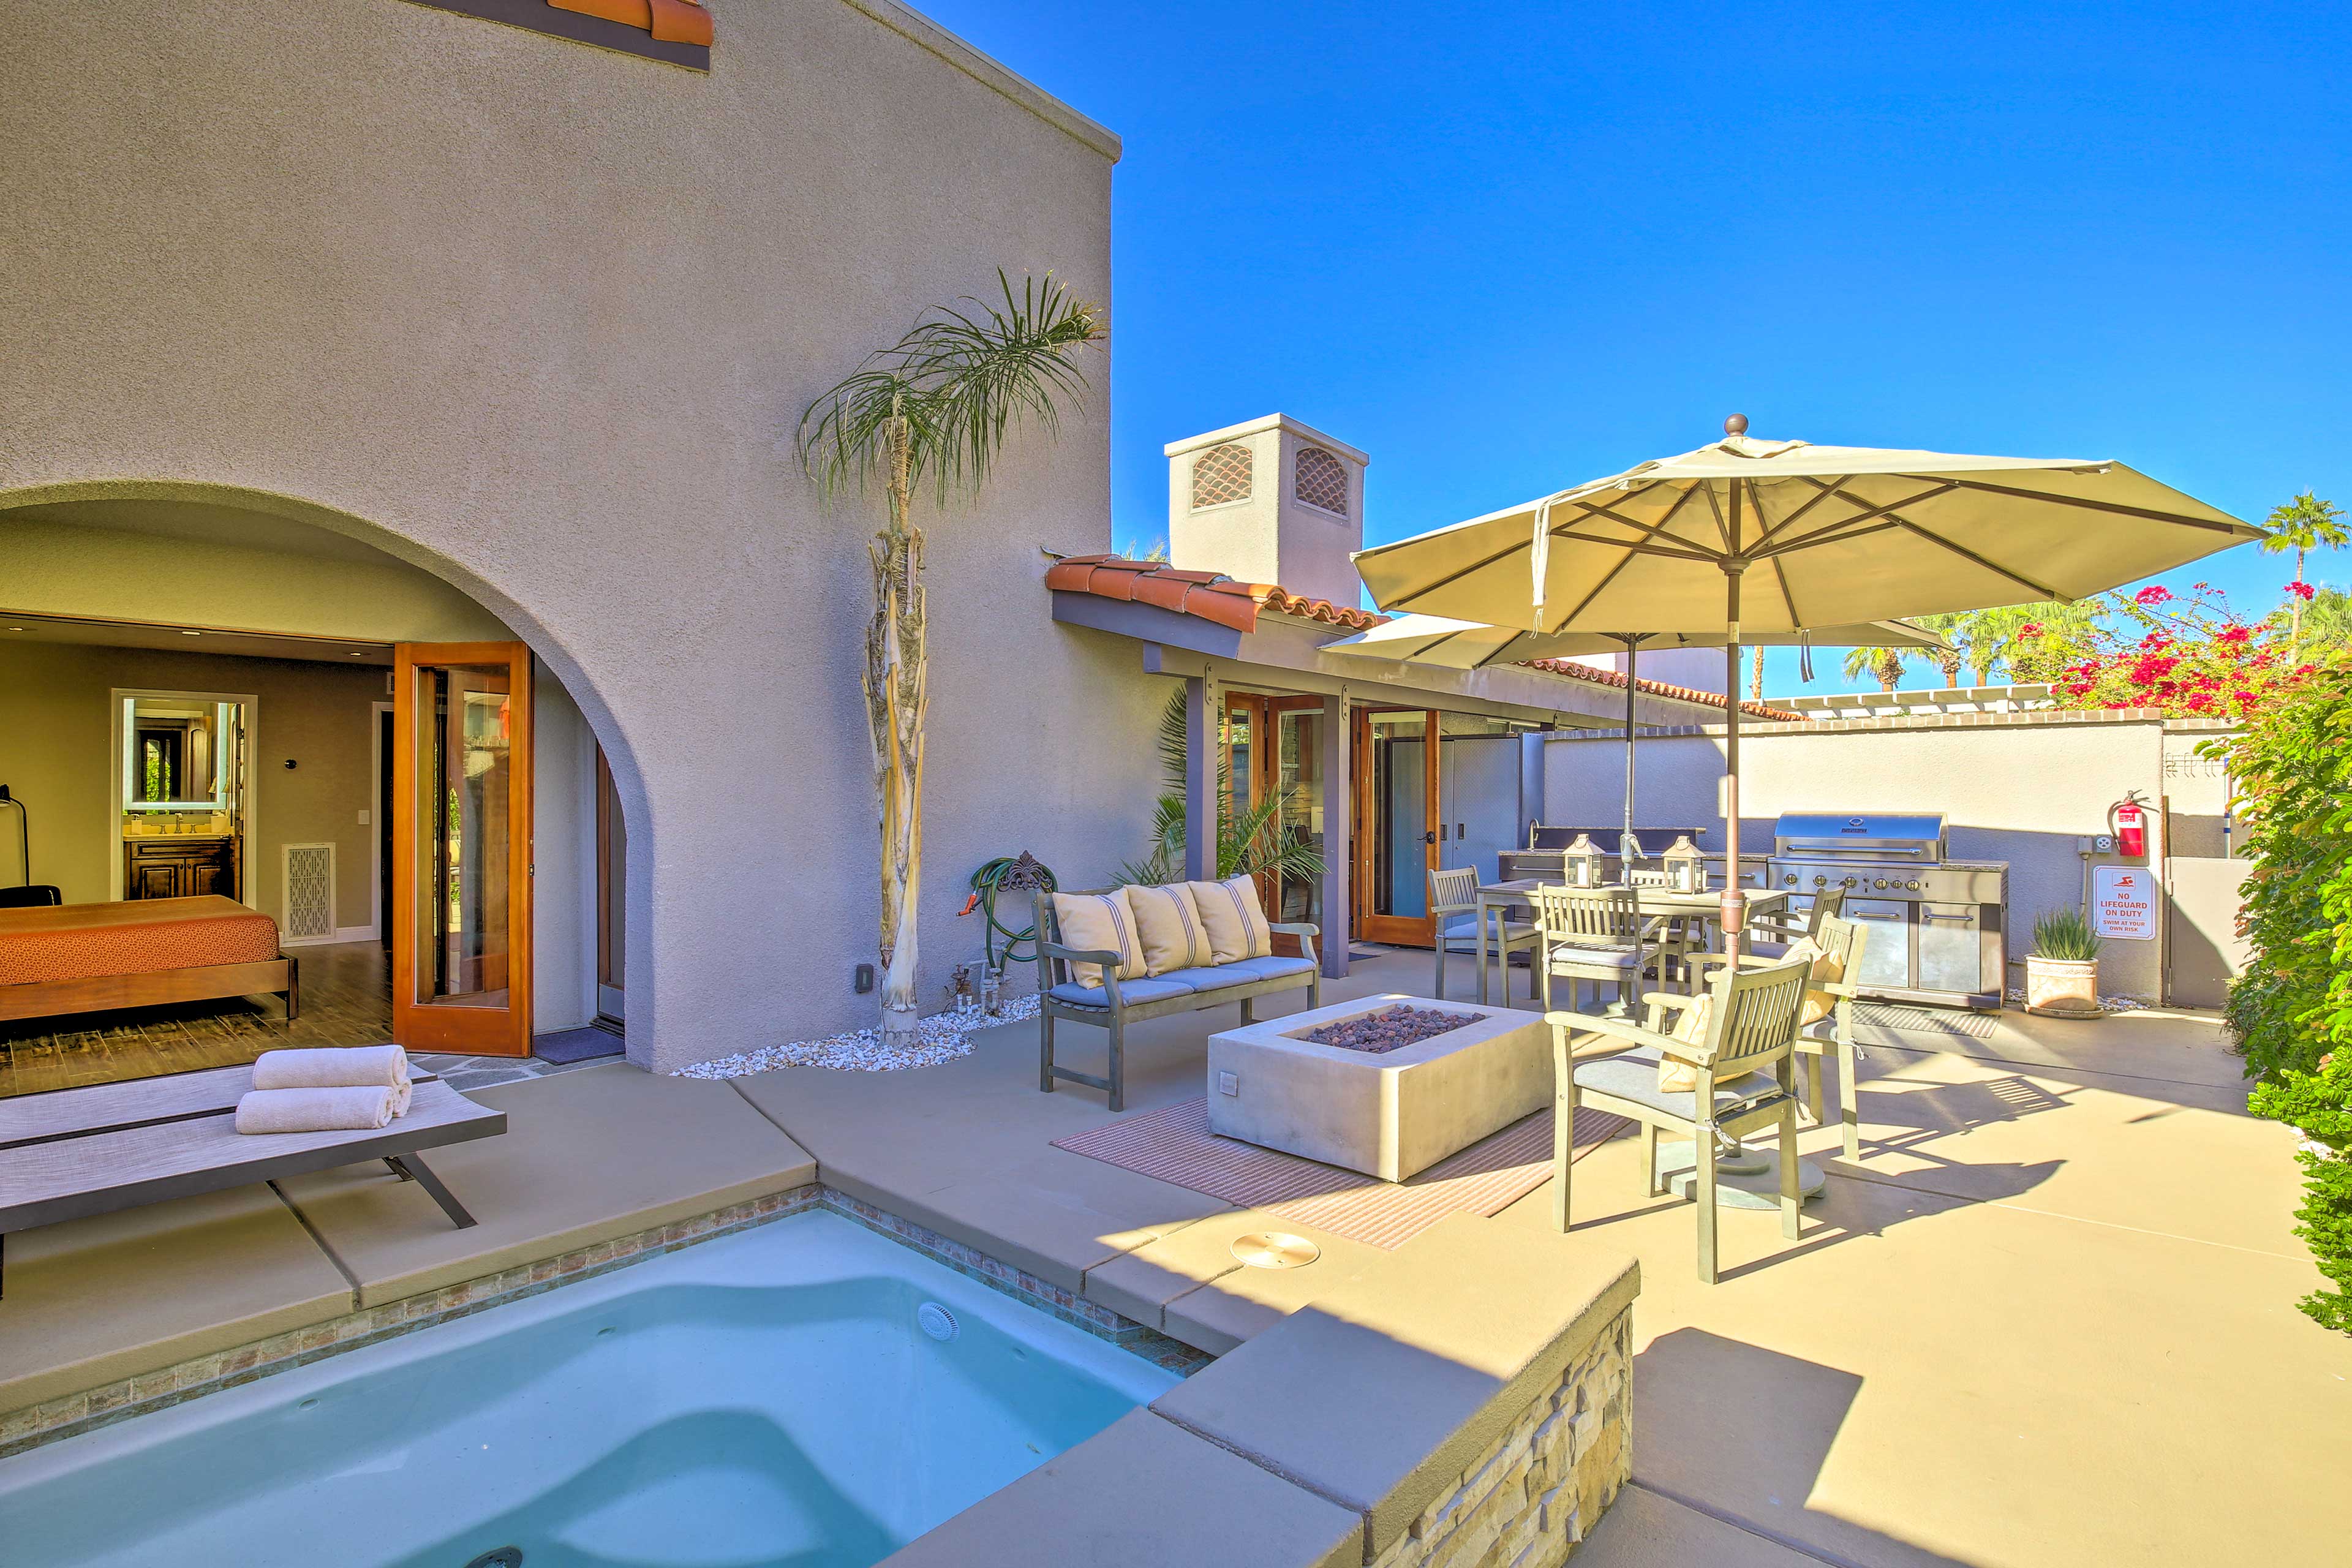 Property Image 2 - Dtwn Palm Springs Condo: BBQ, Pool, Fire Pit, etc!